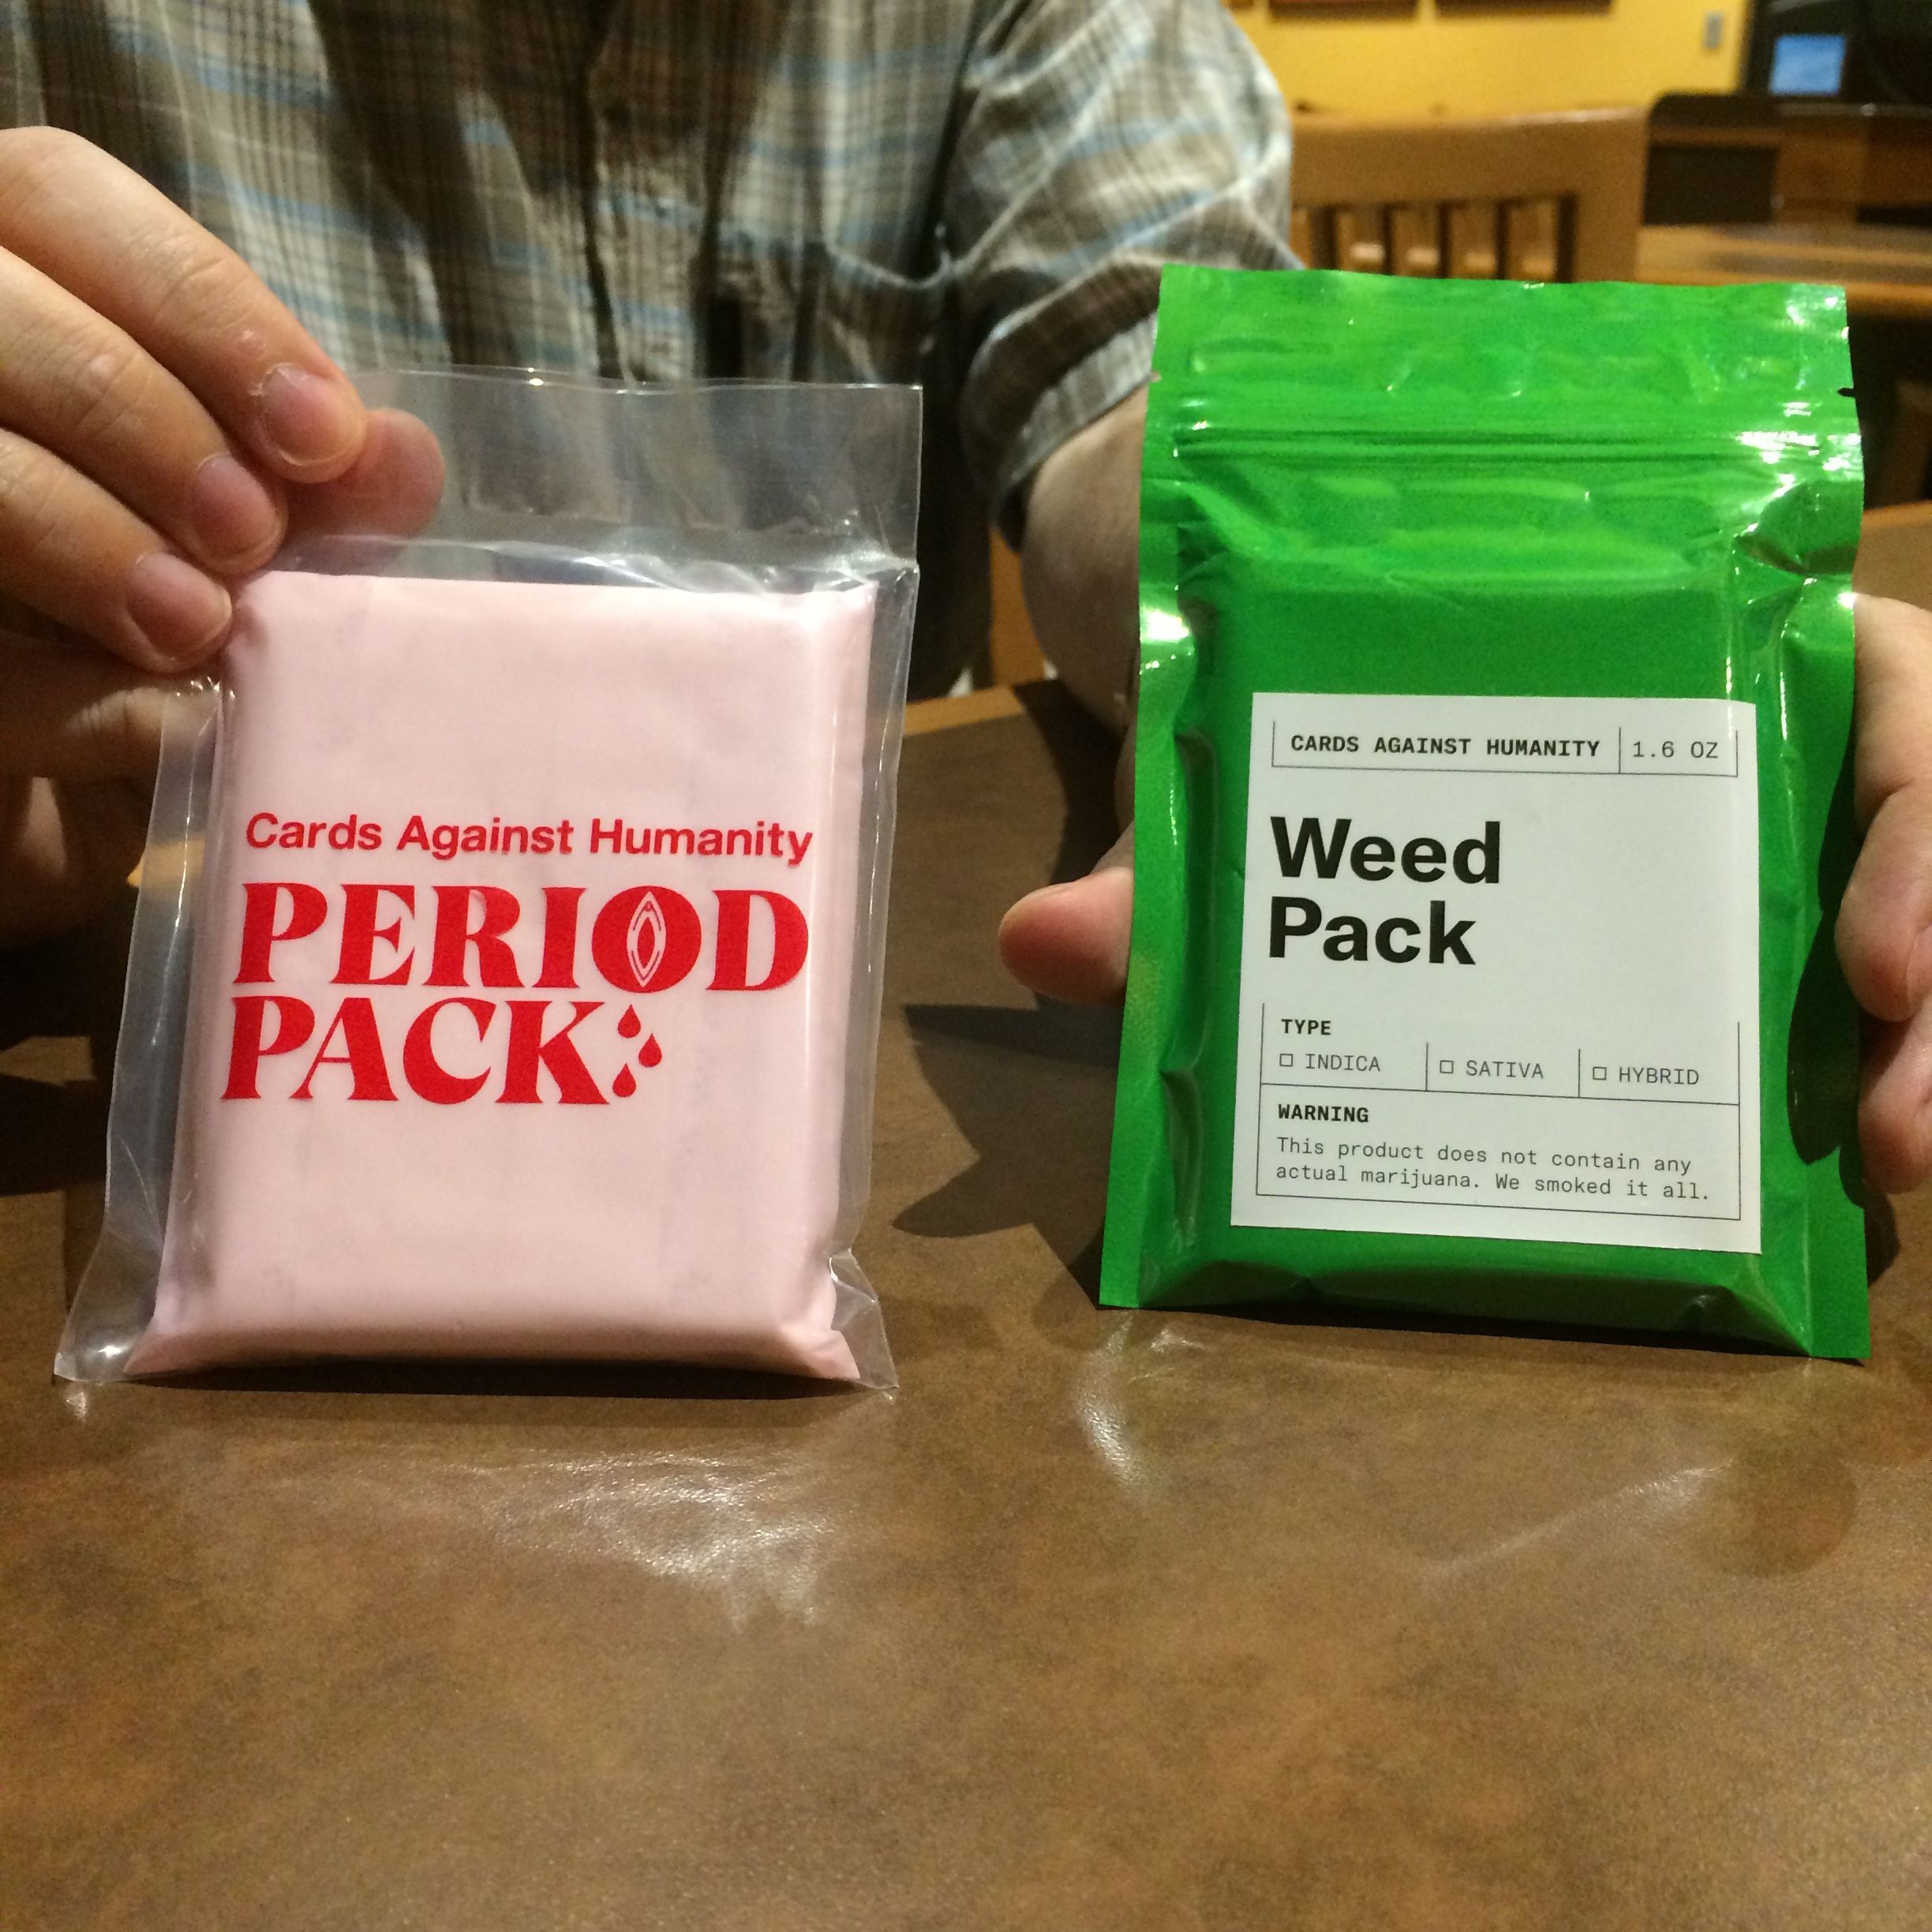 Cards Against Humanity: Period Pack, Image